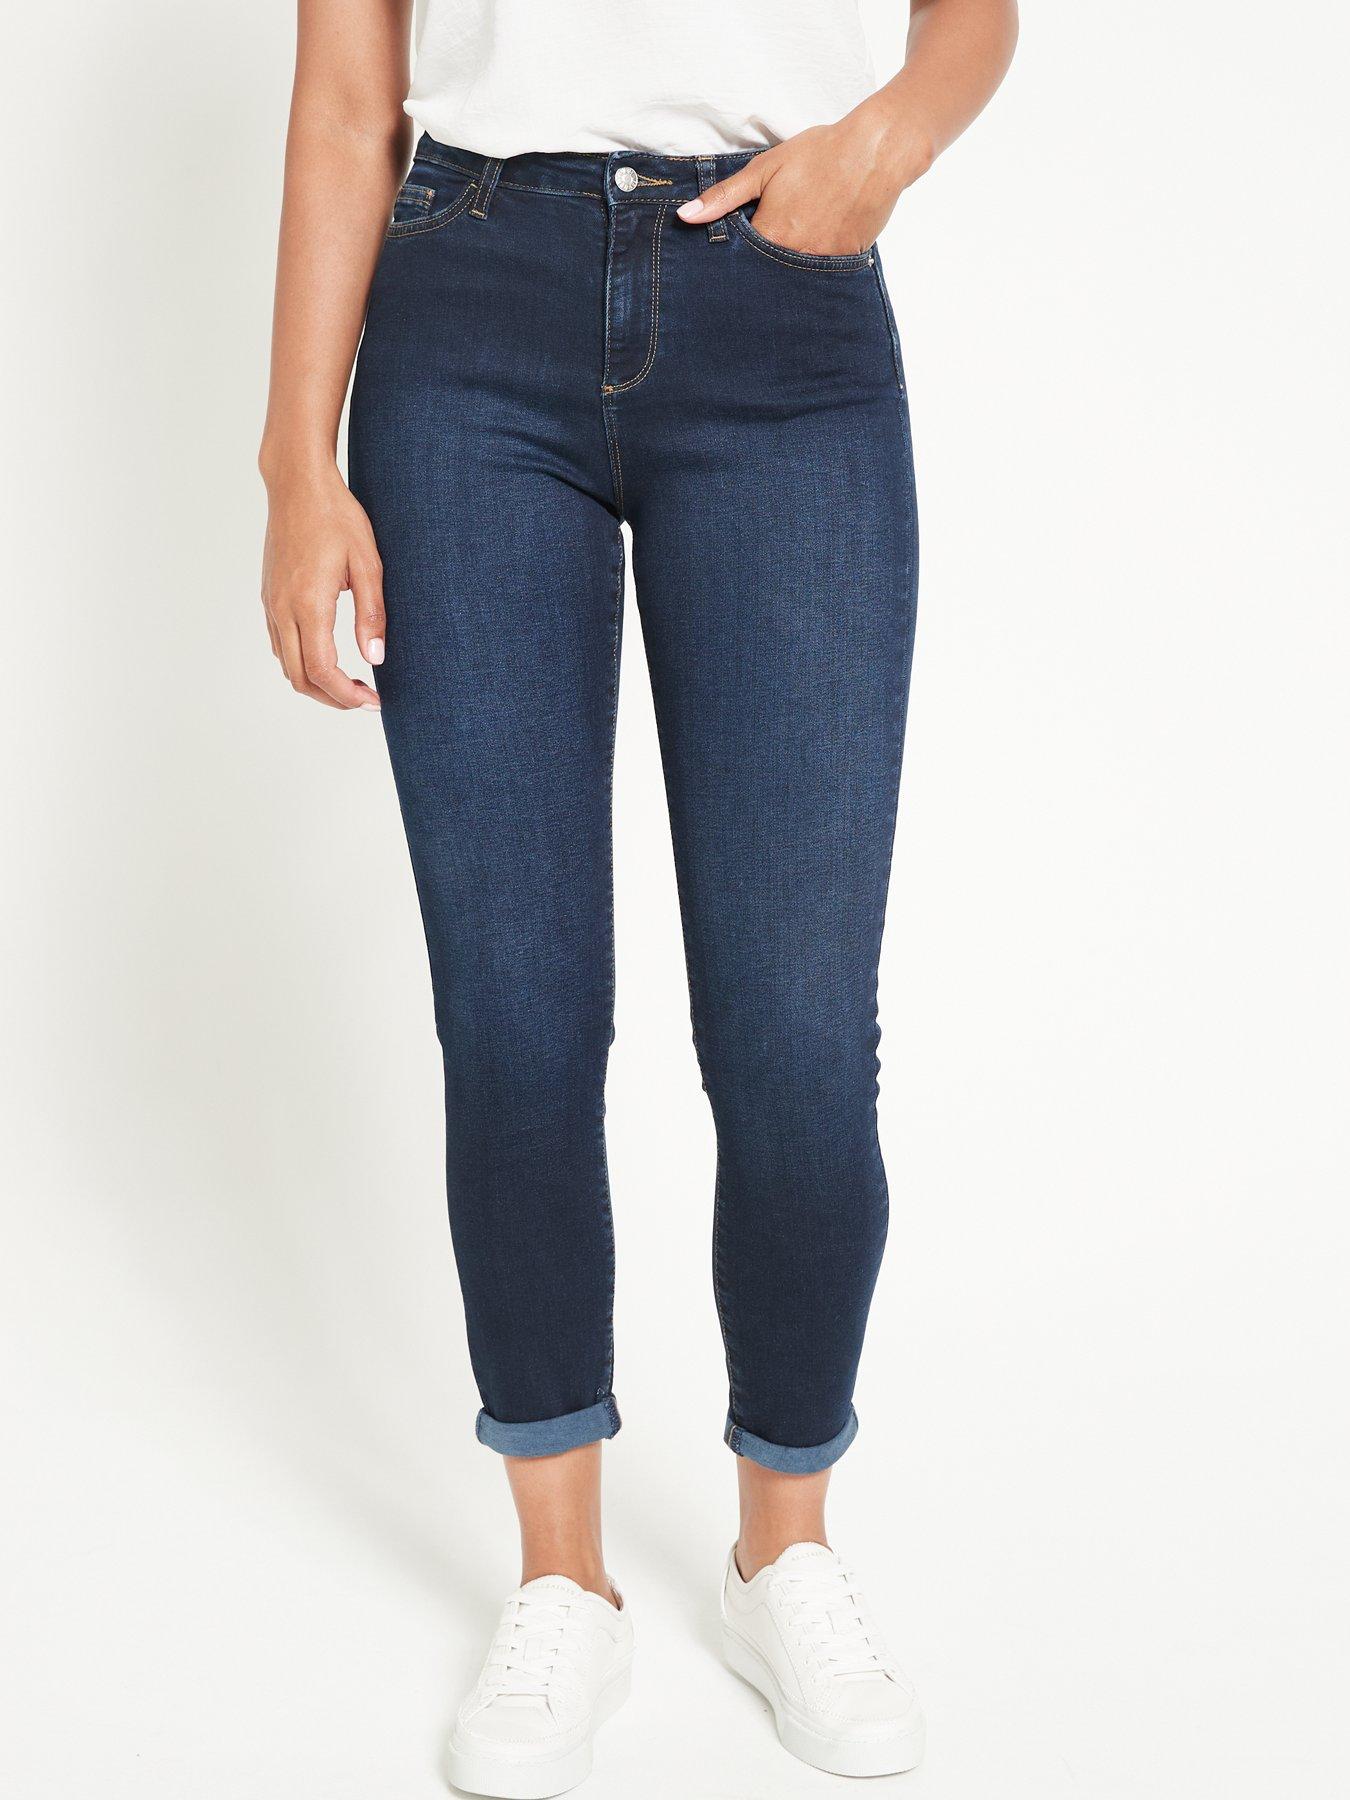 Jeans Relaxed Skinny Jean - Dark Wash